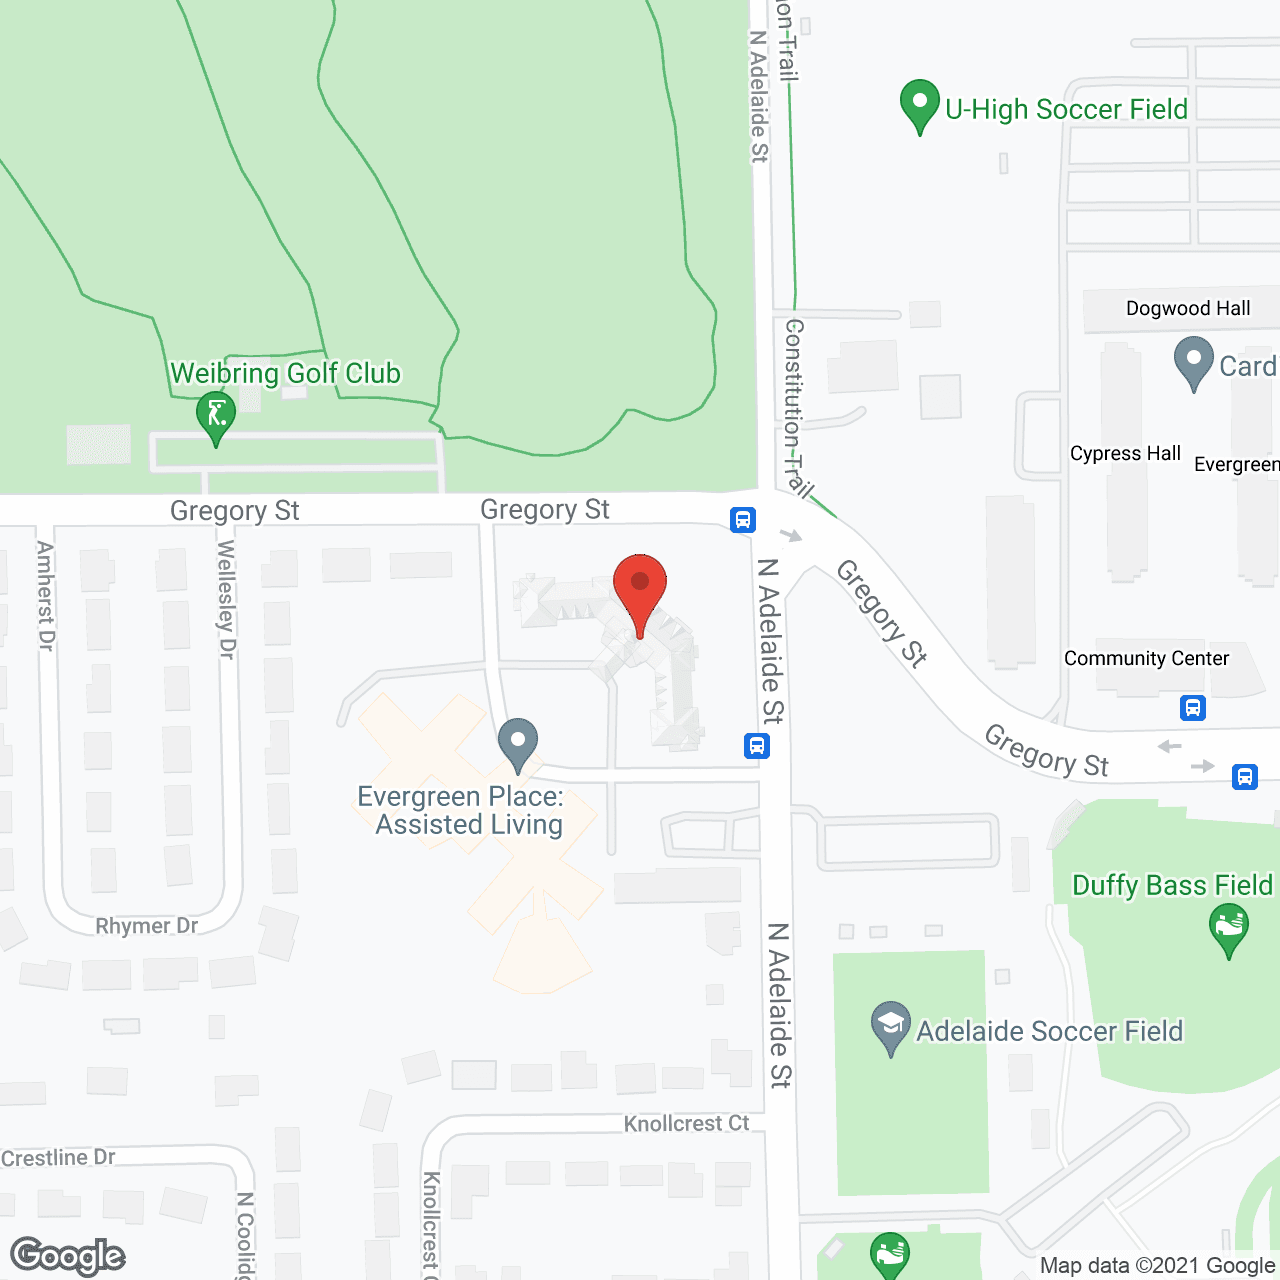 Evergreen Place Assisted Living in google map